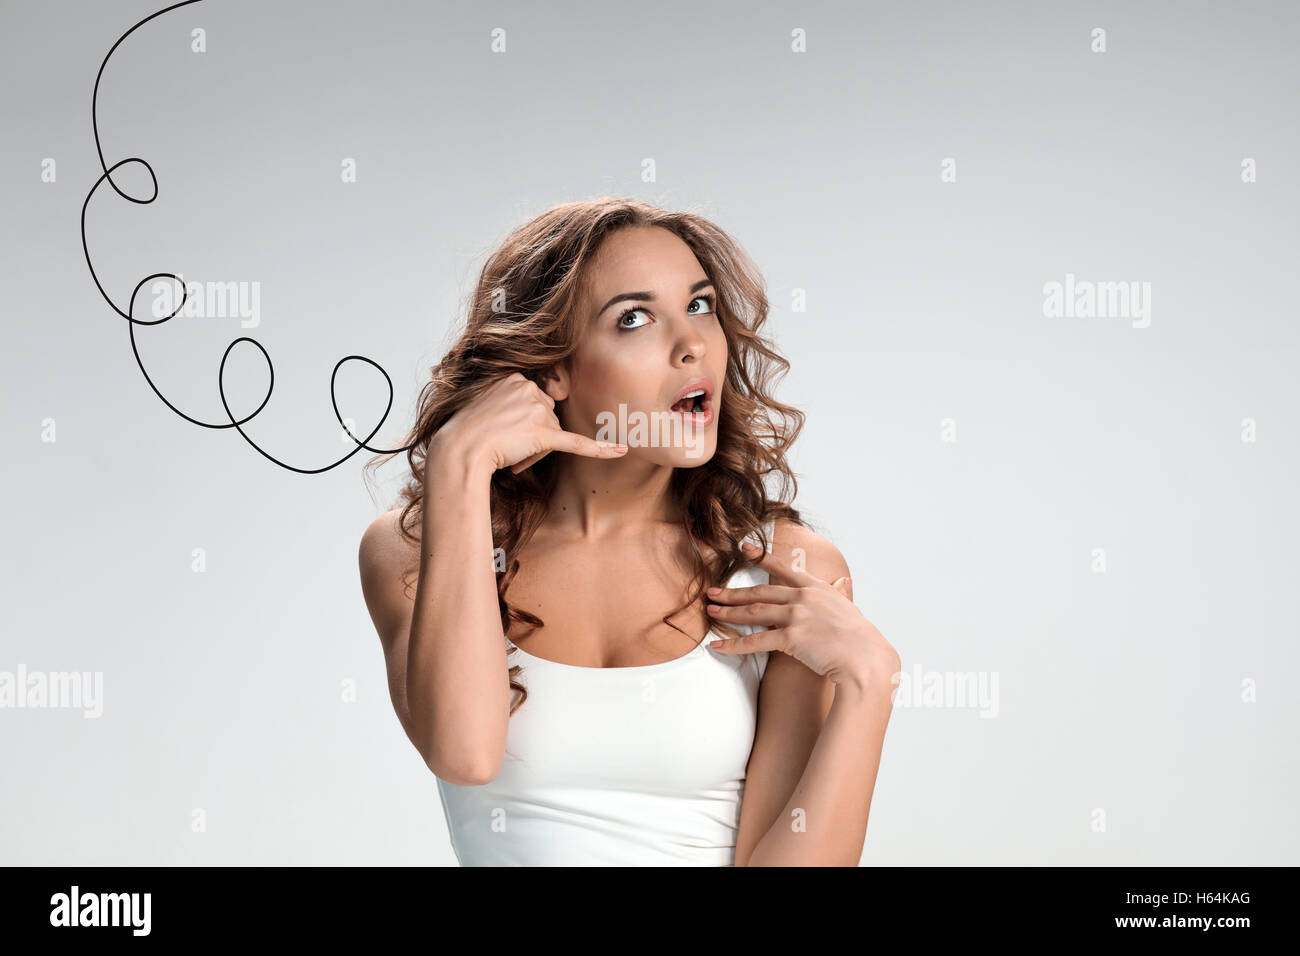 The young woman waiting for a response Stock Photo